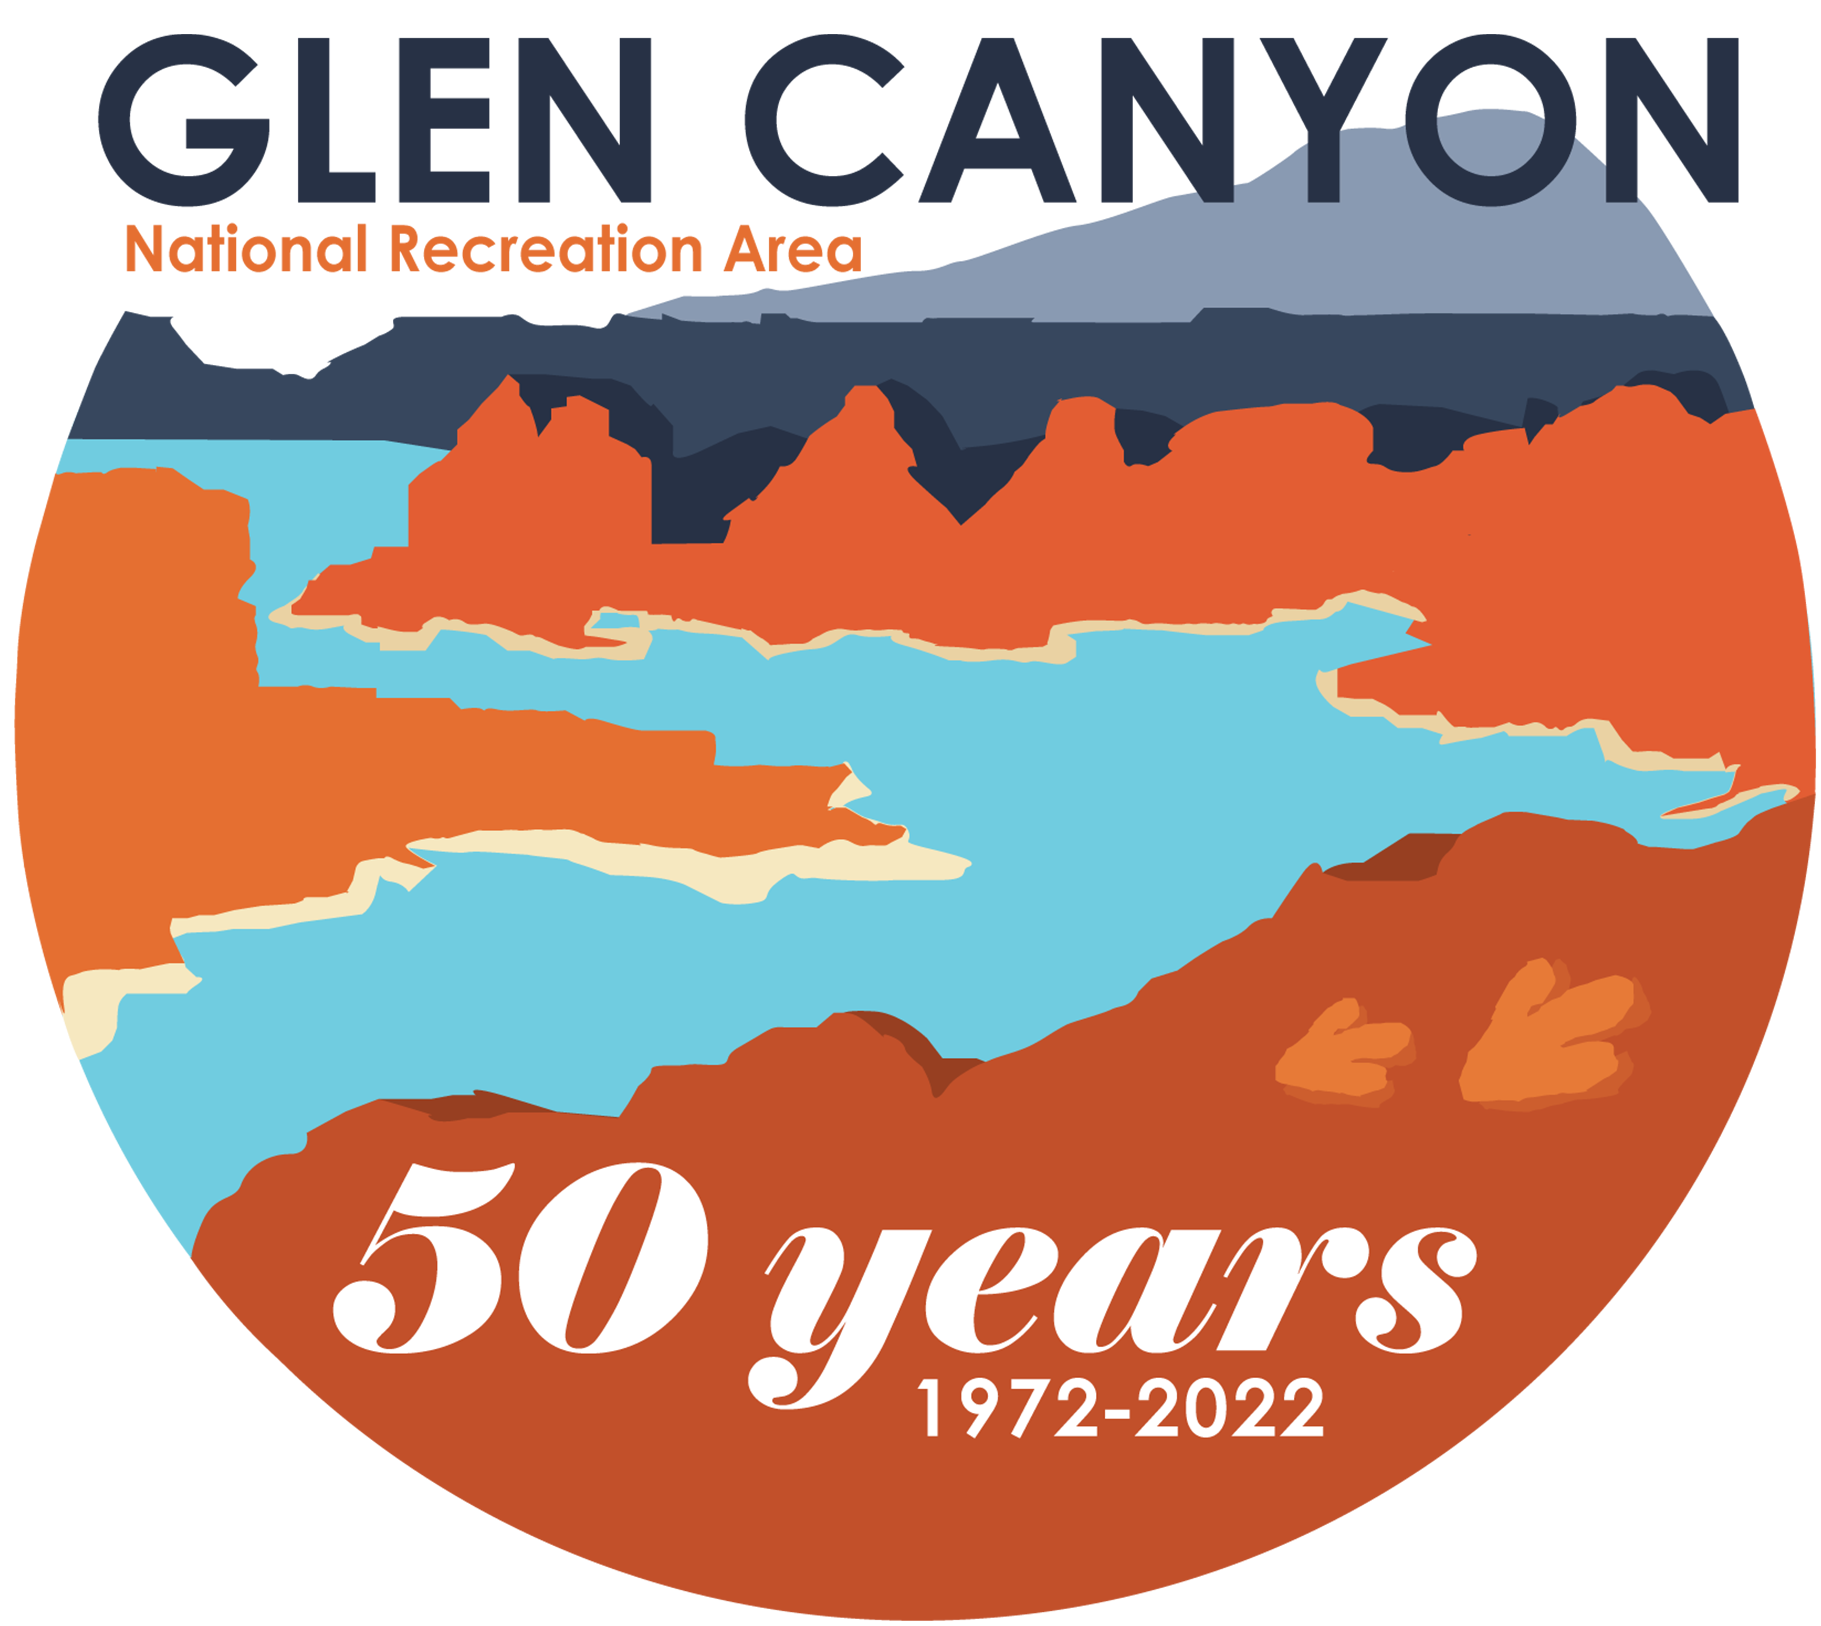 Logo- digital illustration of orange canyons, winding blue waterway, dinosaur foot prints, and purple mountain and mesas. Reads Glen Canyon National Recreation Area 50 years 1972 - 2022